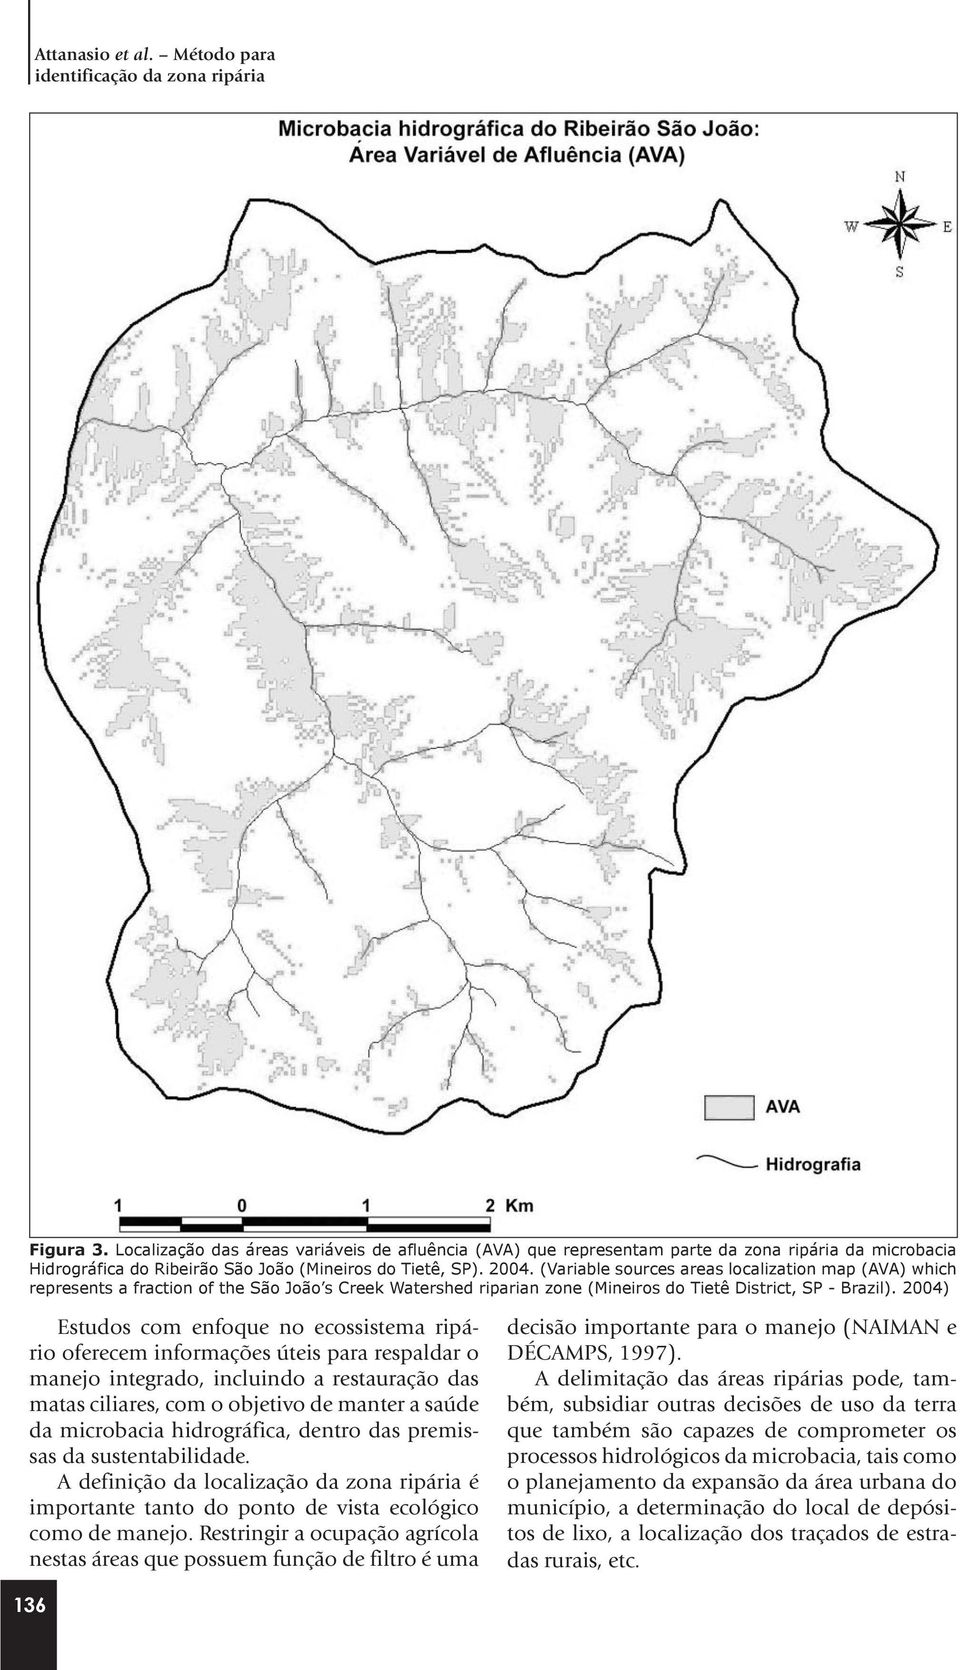 (Variable sources areas localization map (AVA) which represents a fraction of the São João s Creek Watershed riparian zone (Mineiros do Tietê District, SP - Brazil).